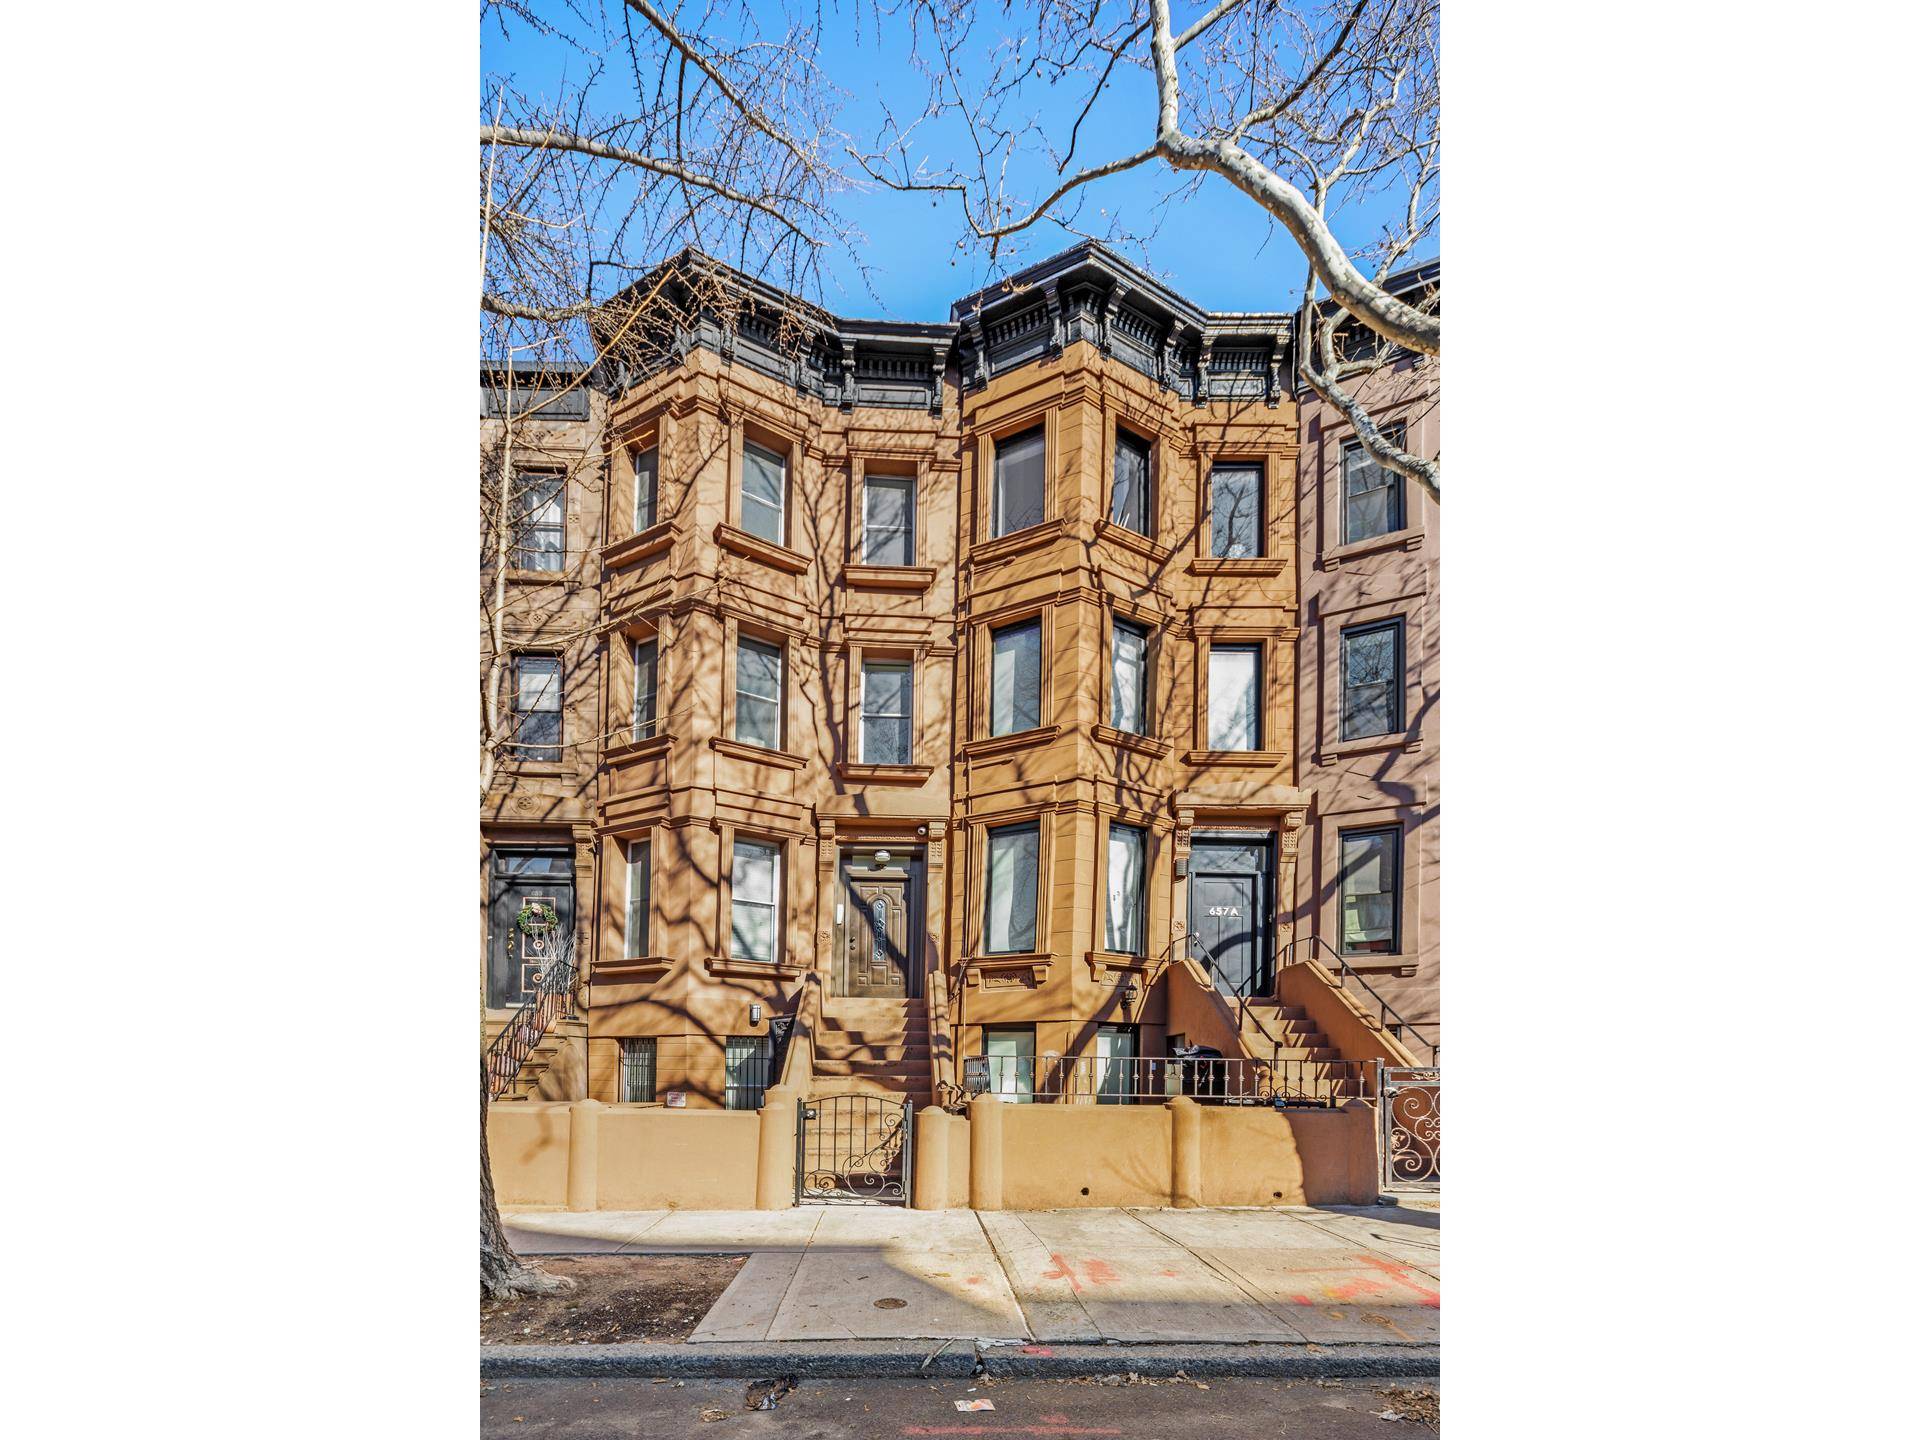 657 DegrawStreet is a stunning Neo Grec Brooklyn brownstone, fully restored and adapted to modern living.